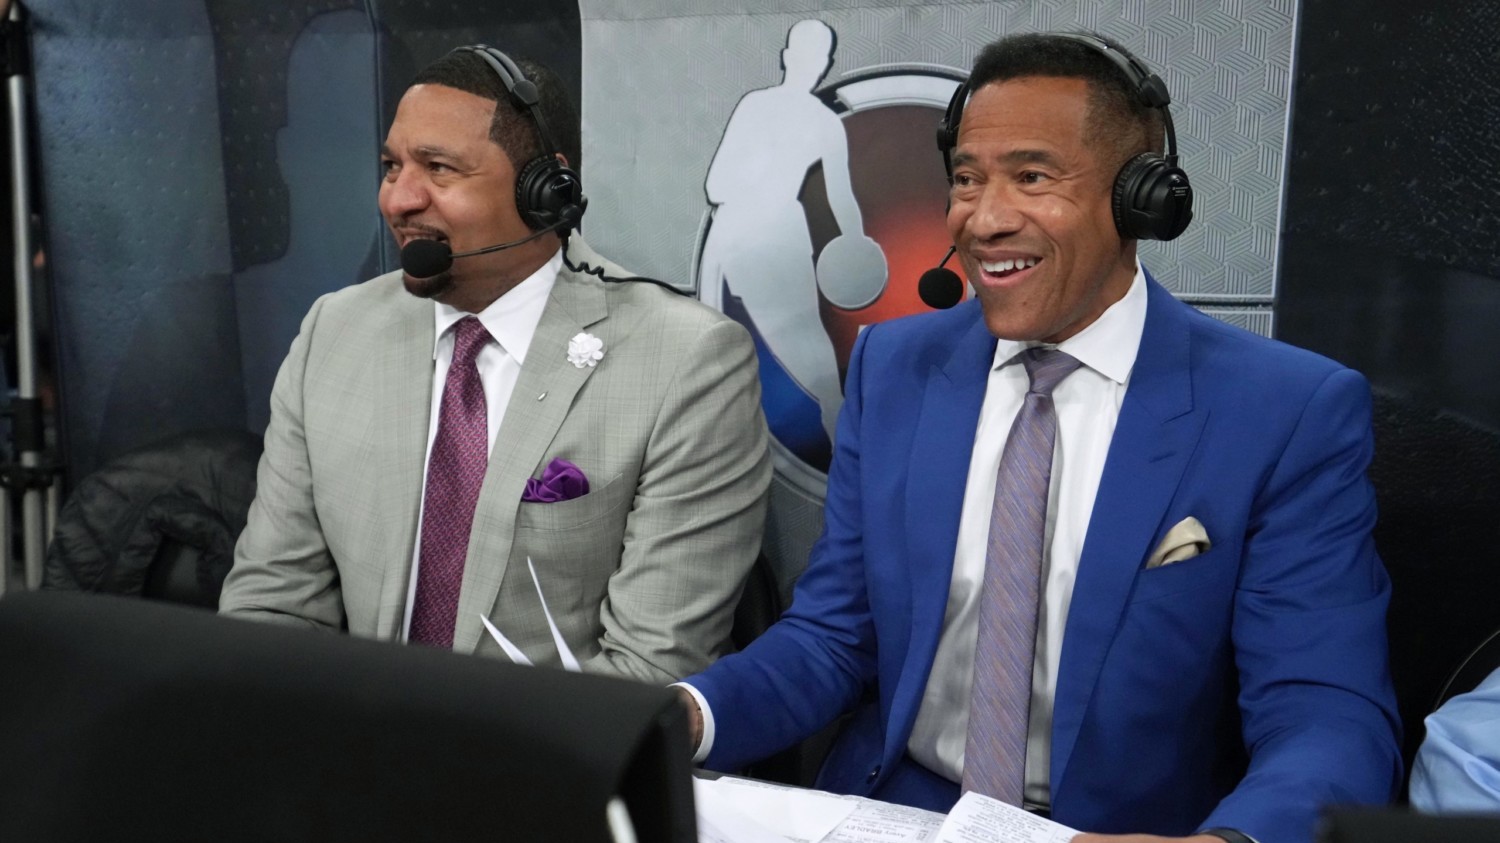 ESPN To Have First All-Black Broadcast Team For an NBA Finals